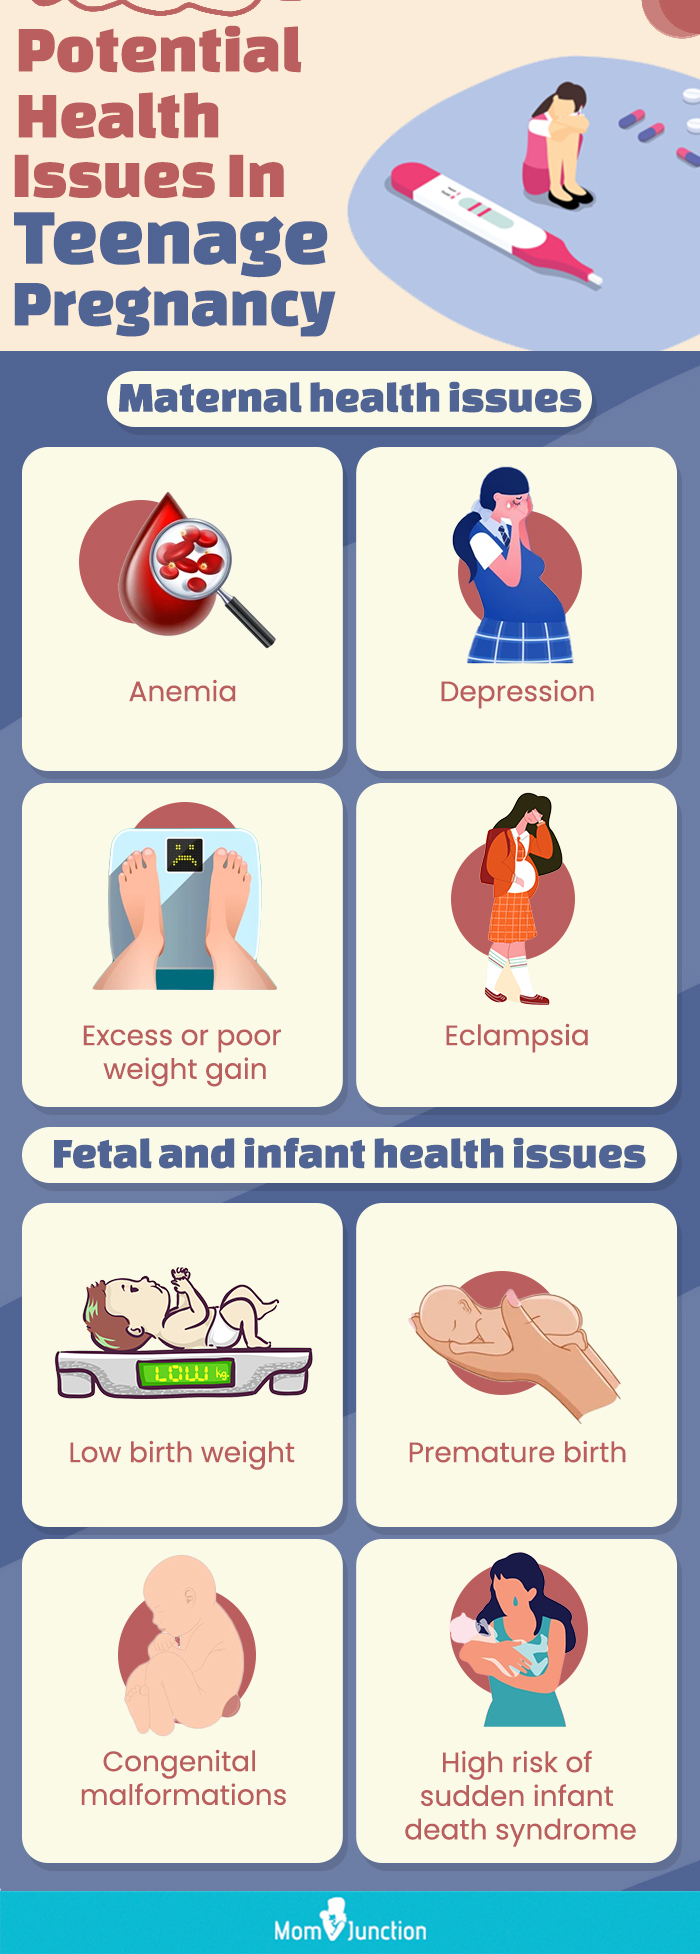  potential health issues in teenage pregnancy (infographic)